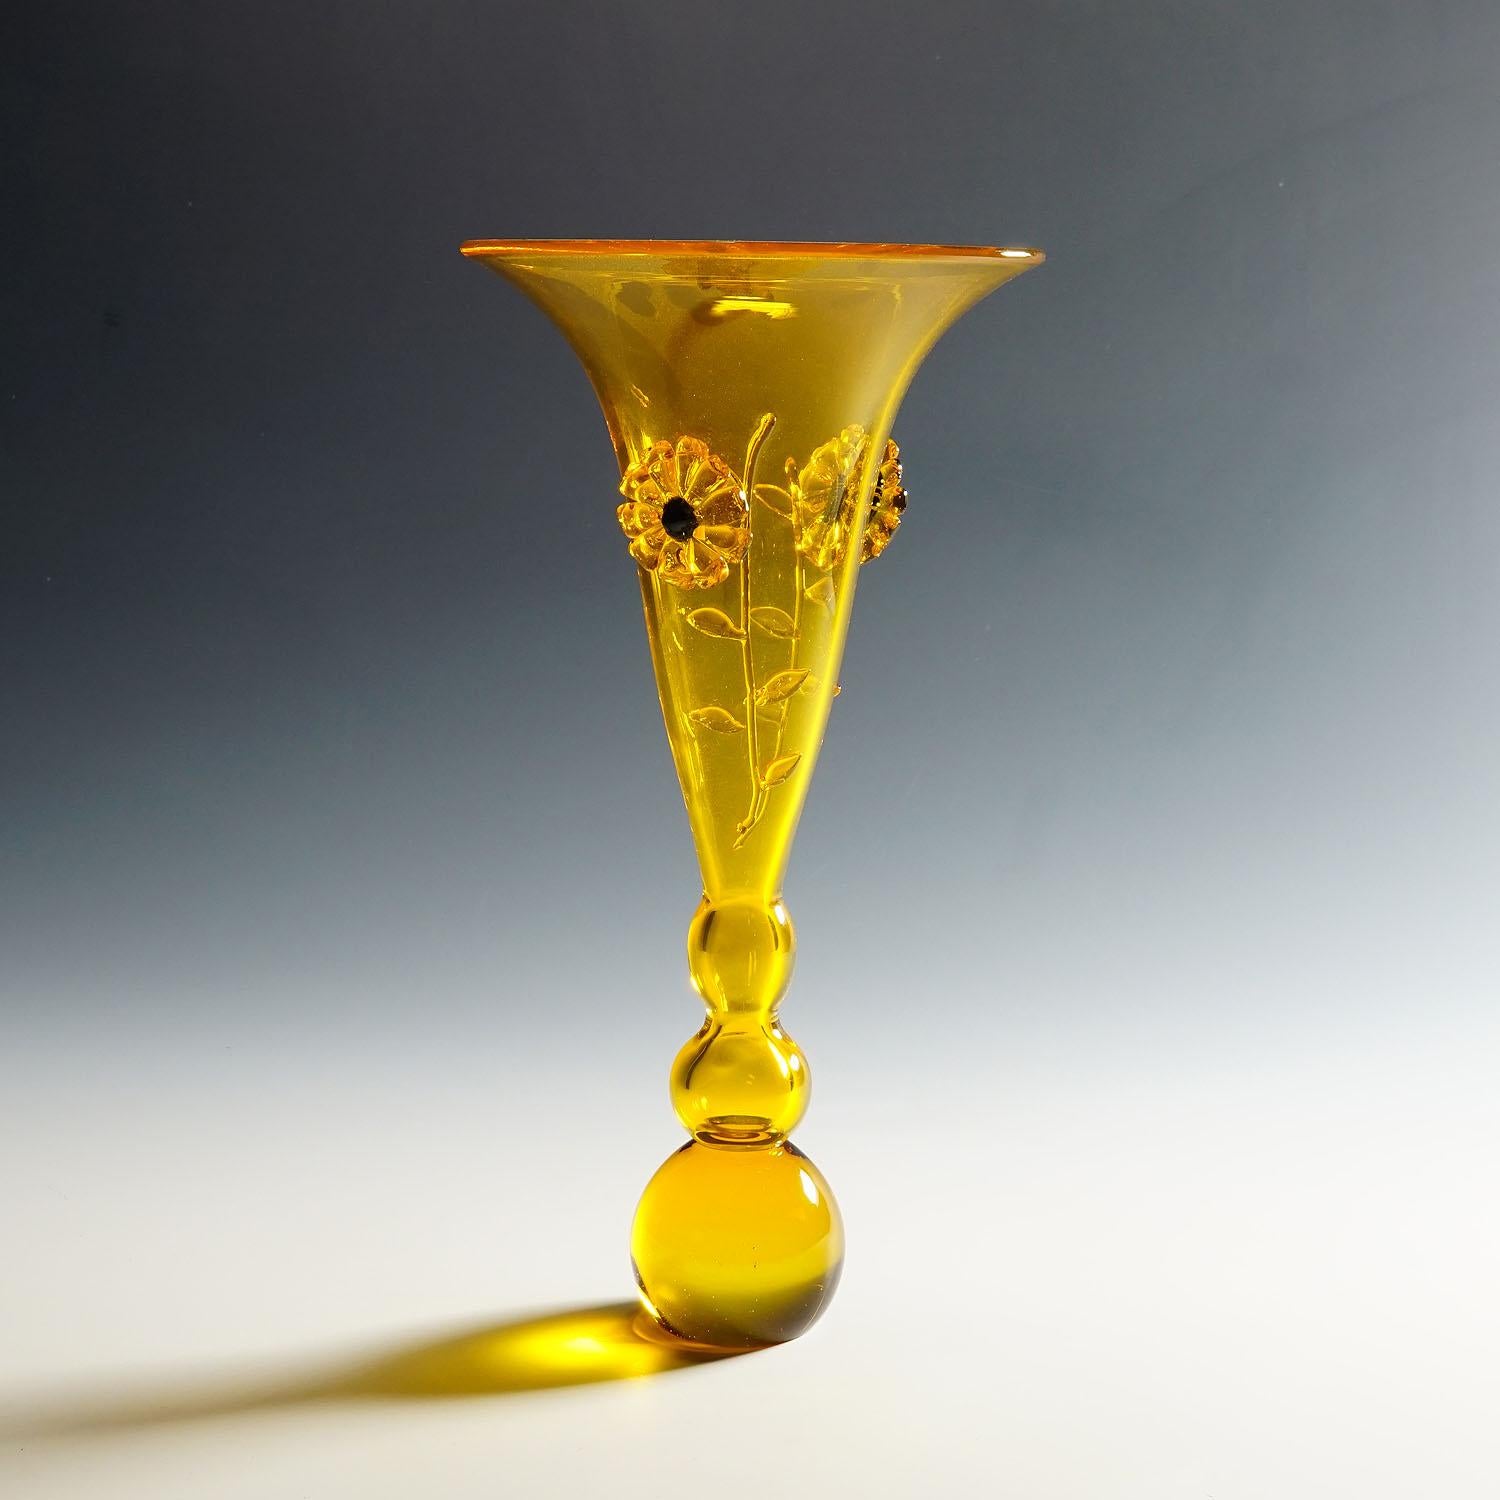 Vintage Murano Art Glass Vase by Franco Moretti circa. 1970s

A vintage Murano art glass vase designed by Franco Moretti circa 1970s. Honey yellow glass with applications in the form of flowers. Incised signature 'Moretti Franco' on the